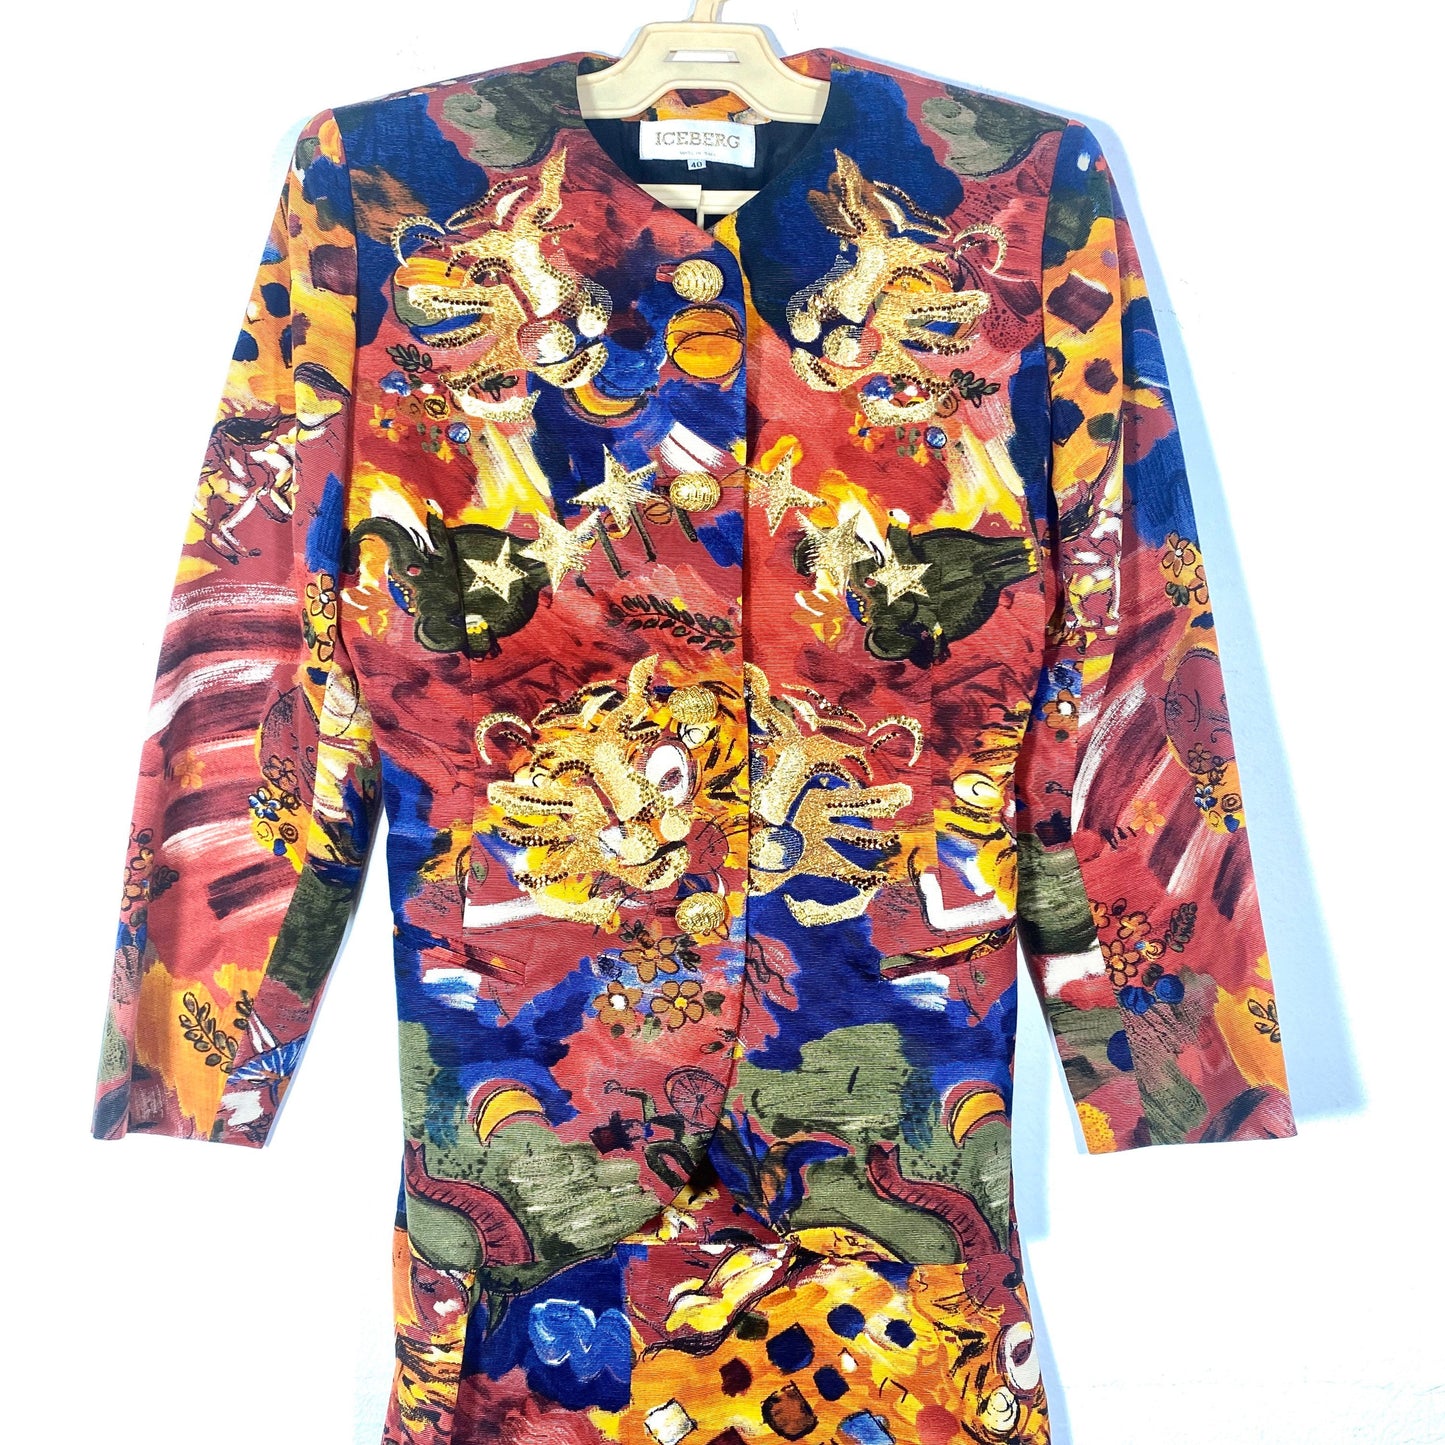 Iceberg 1980s colorful tailleur suit, Chanel style blazer & skirt wirh Incredible print and tigers embroidery